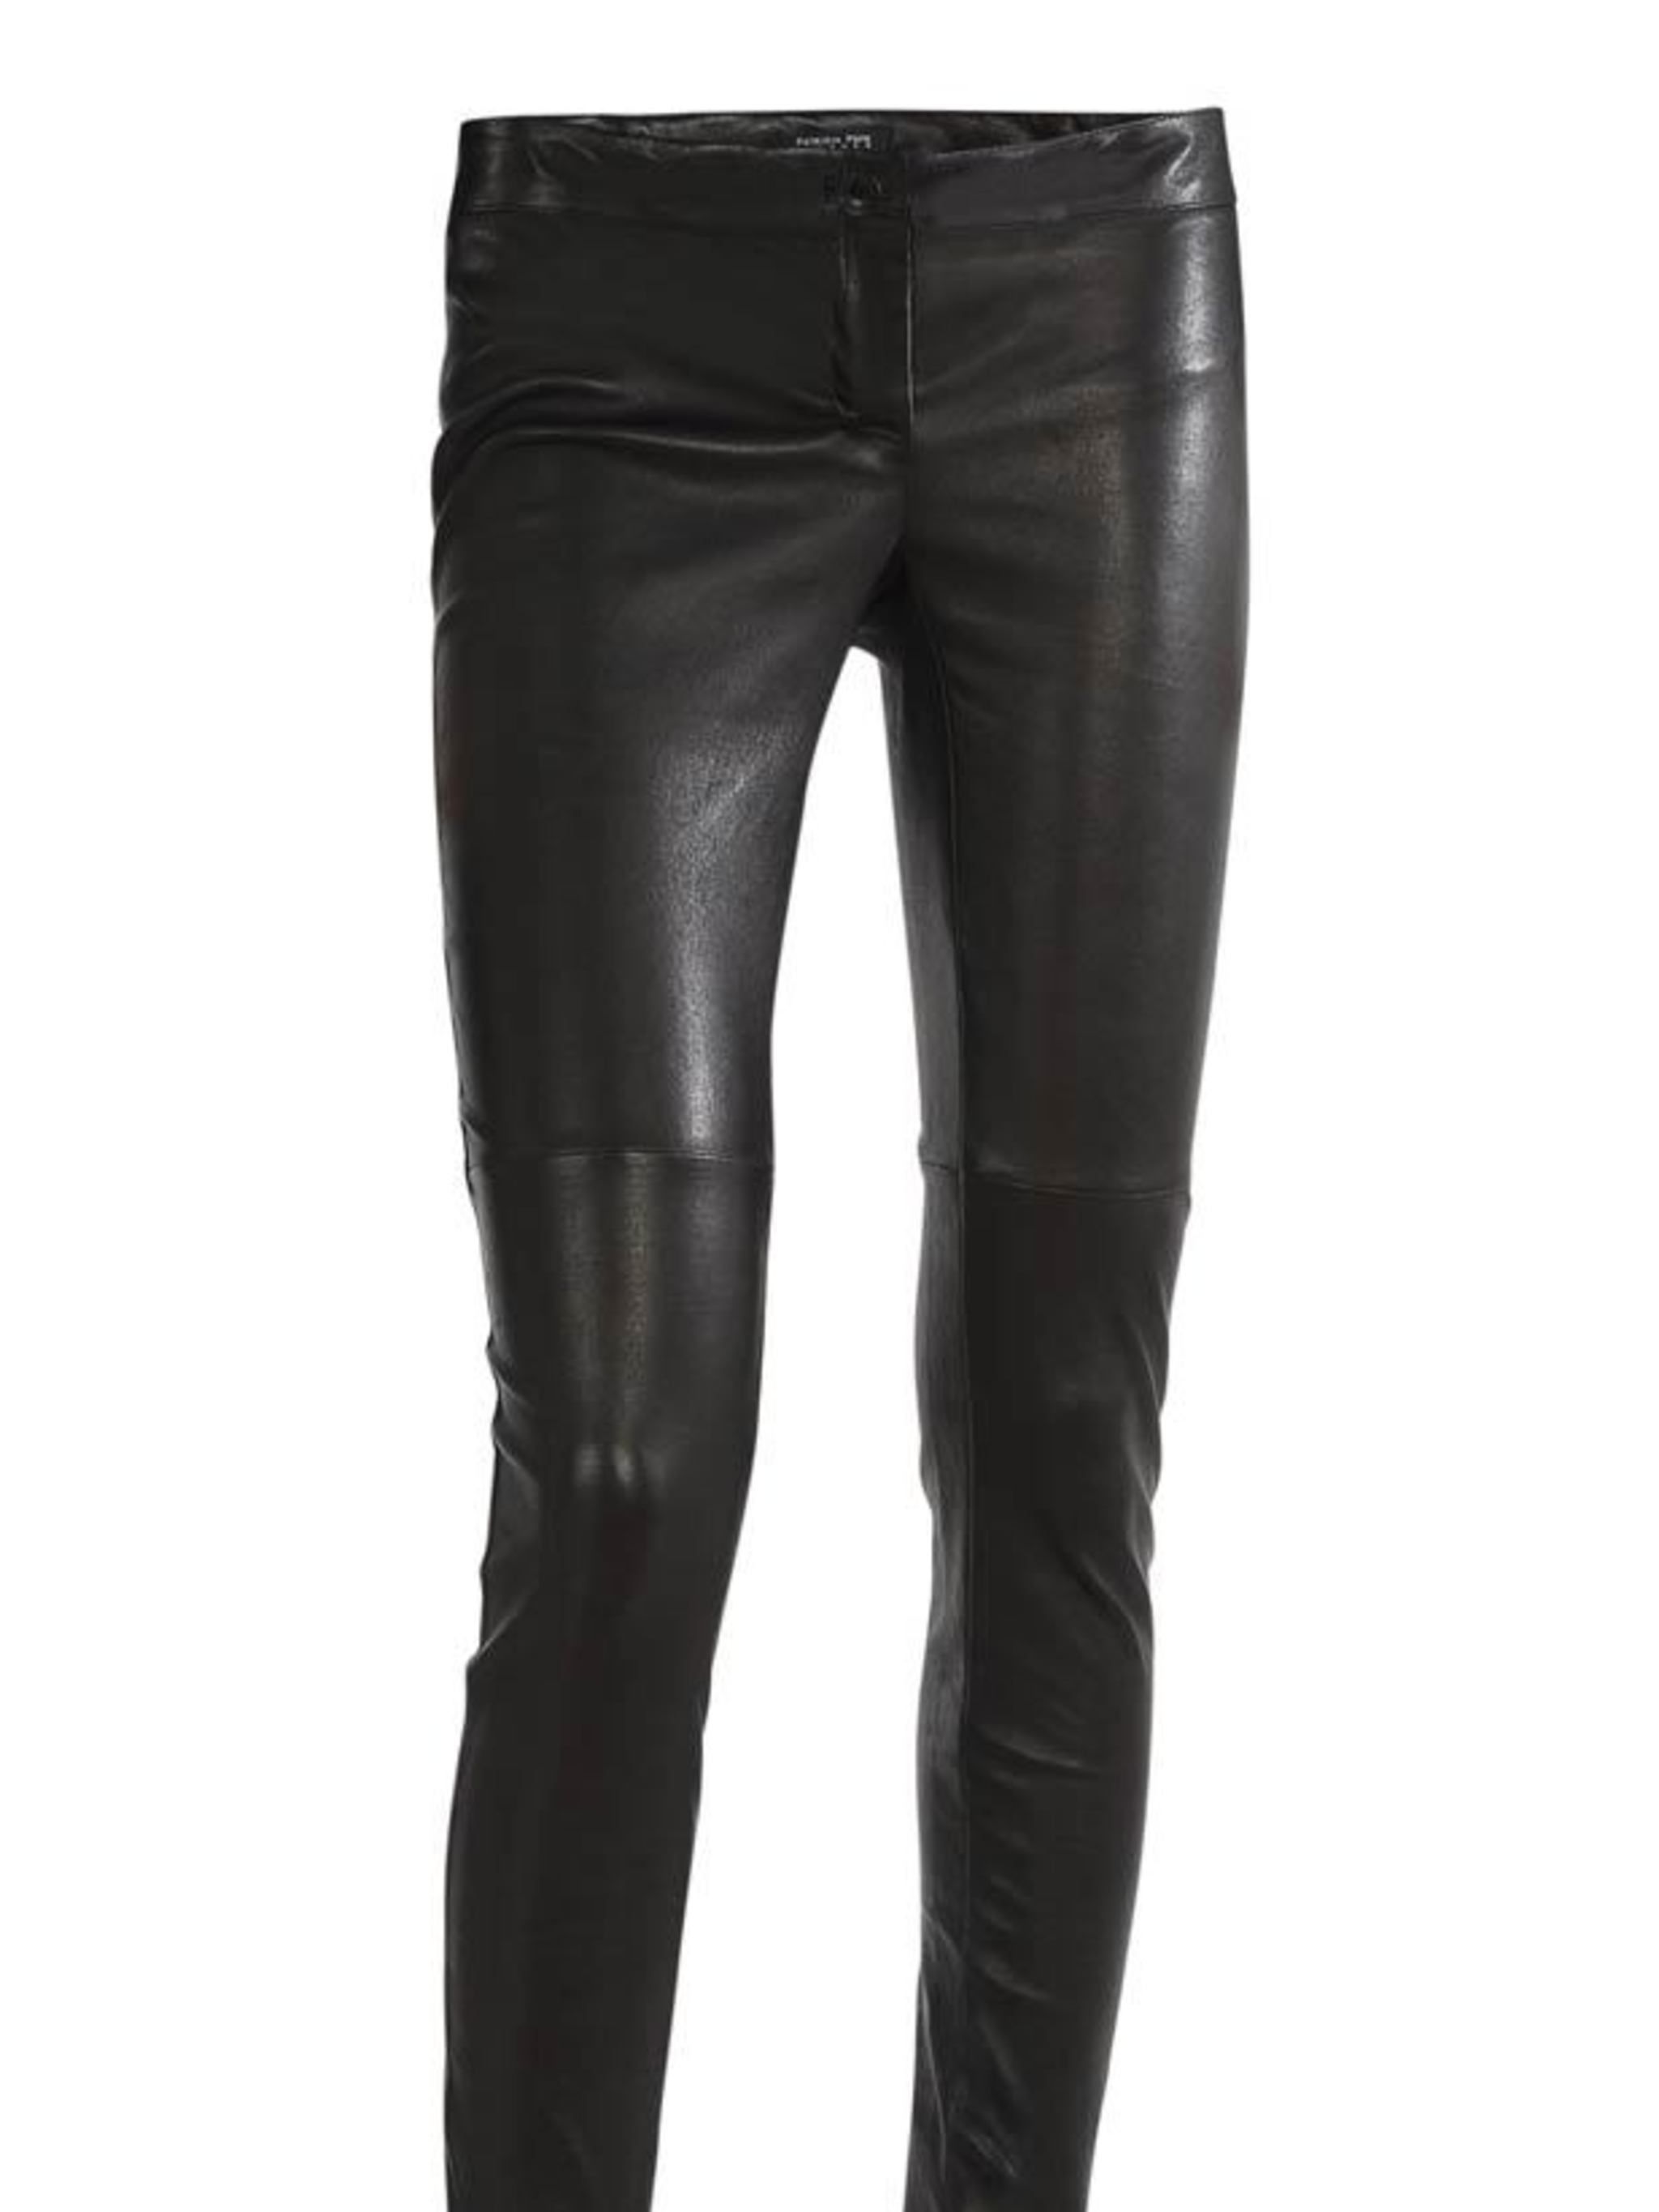 What To Wear With Leather Pants: The Best Leather Trousers Outfits 2022